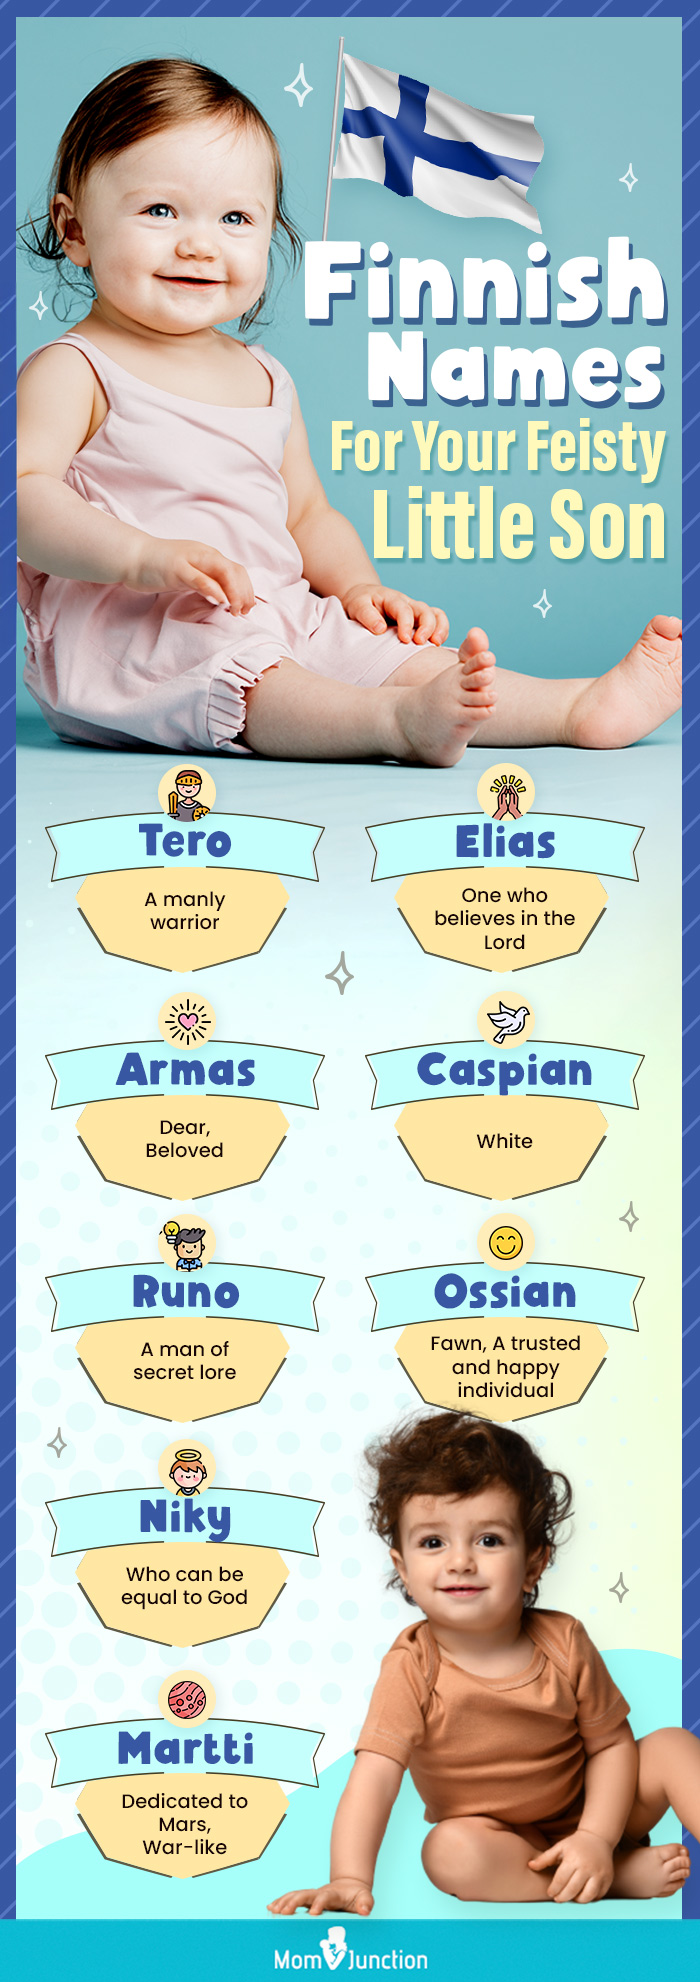 finnish names for your feisty little son (infographic)